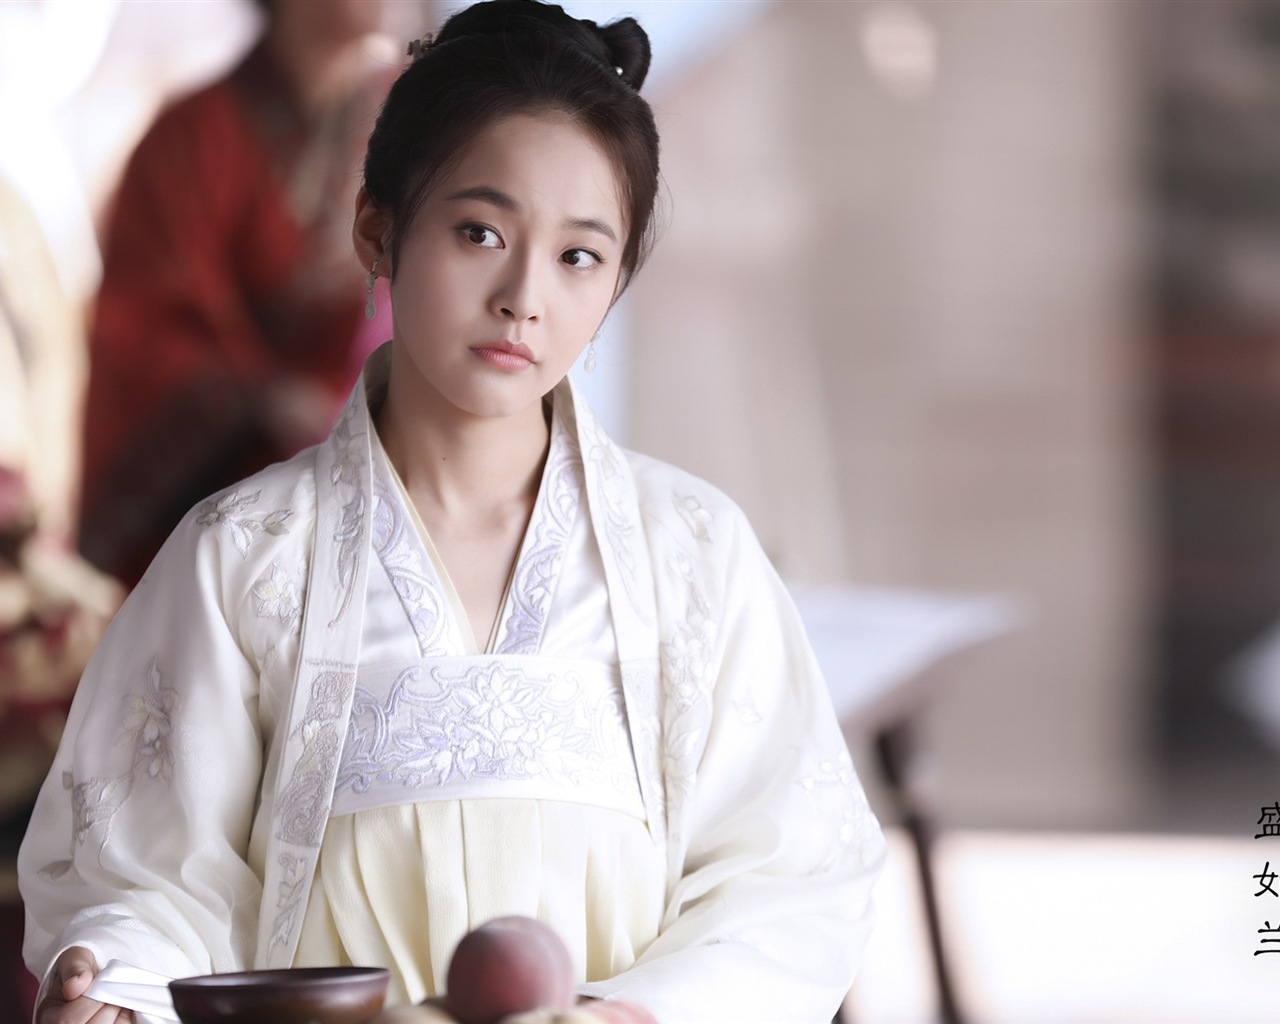 The Story Of MingLan, TV series HD wallpapers #33 - 1280x1024